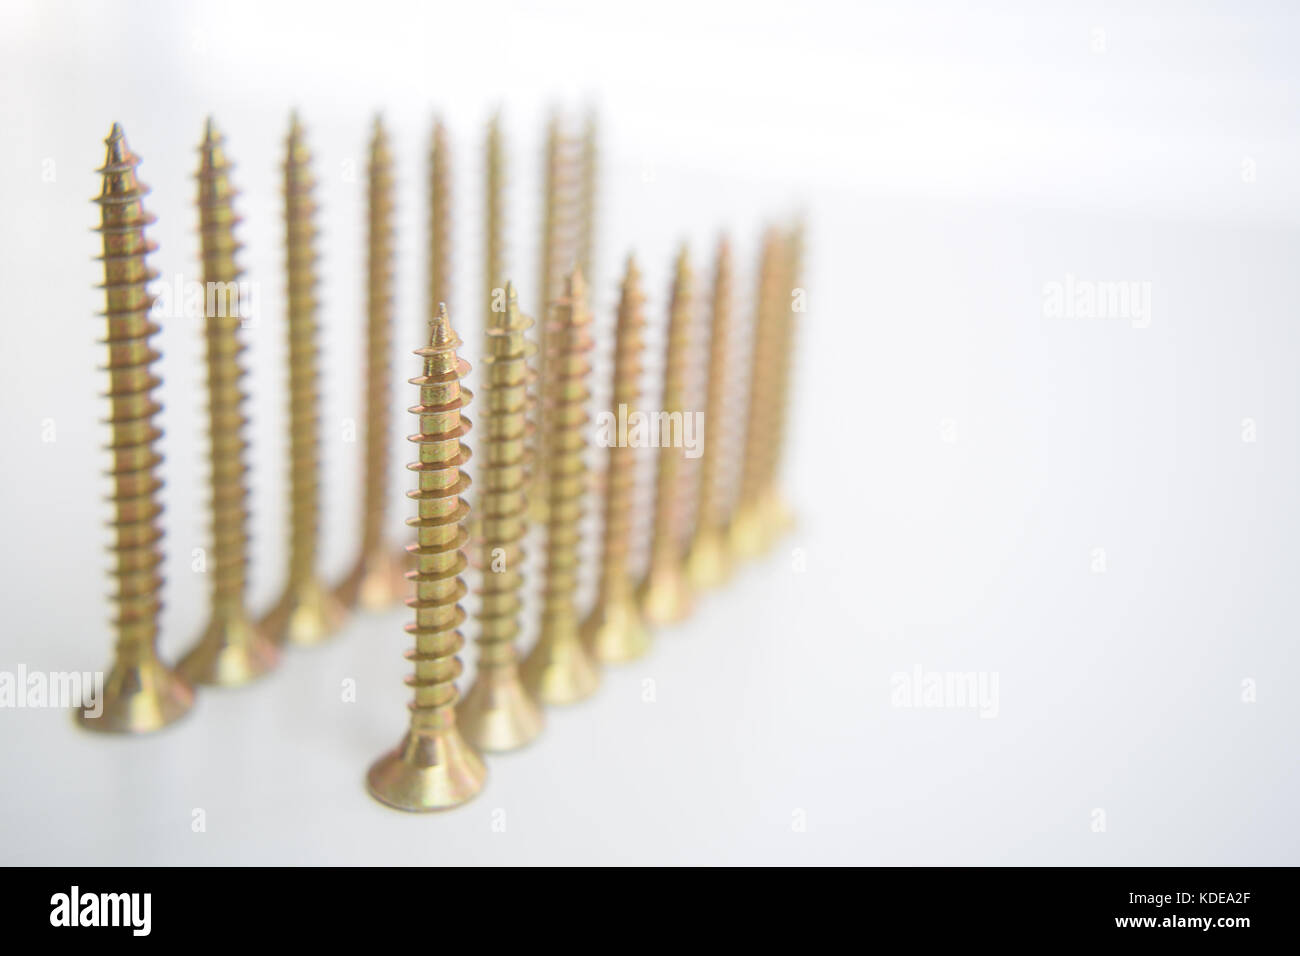 Lines of brass screws on a white background. Organised Stock Photo